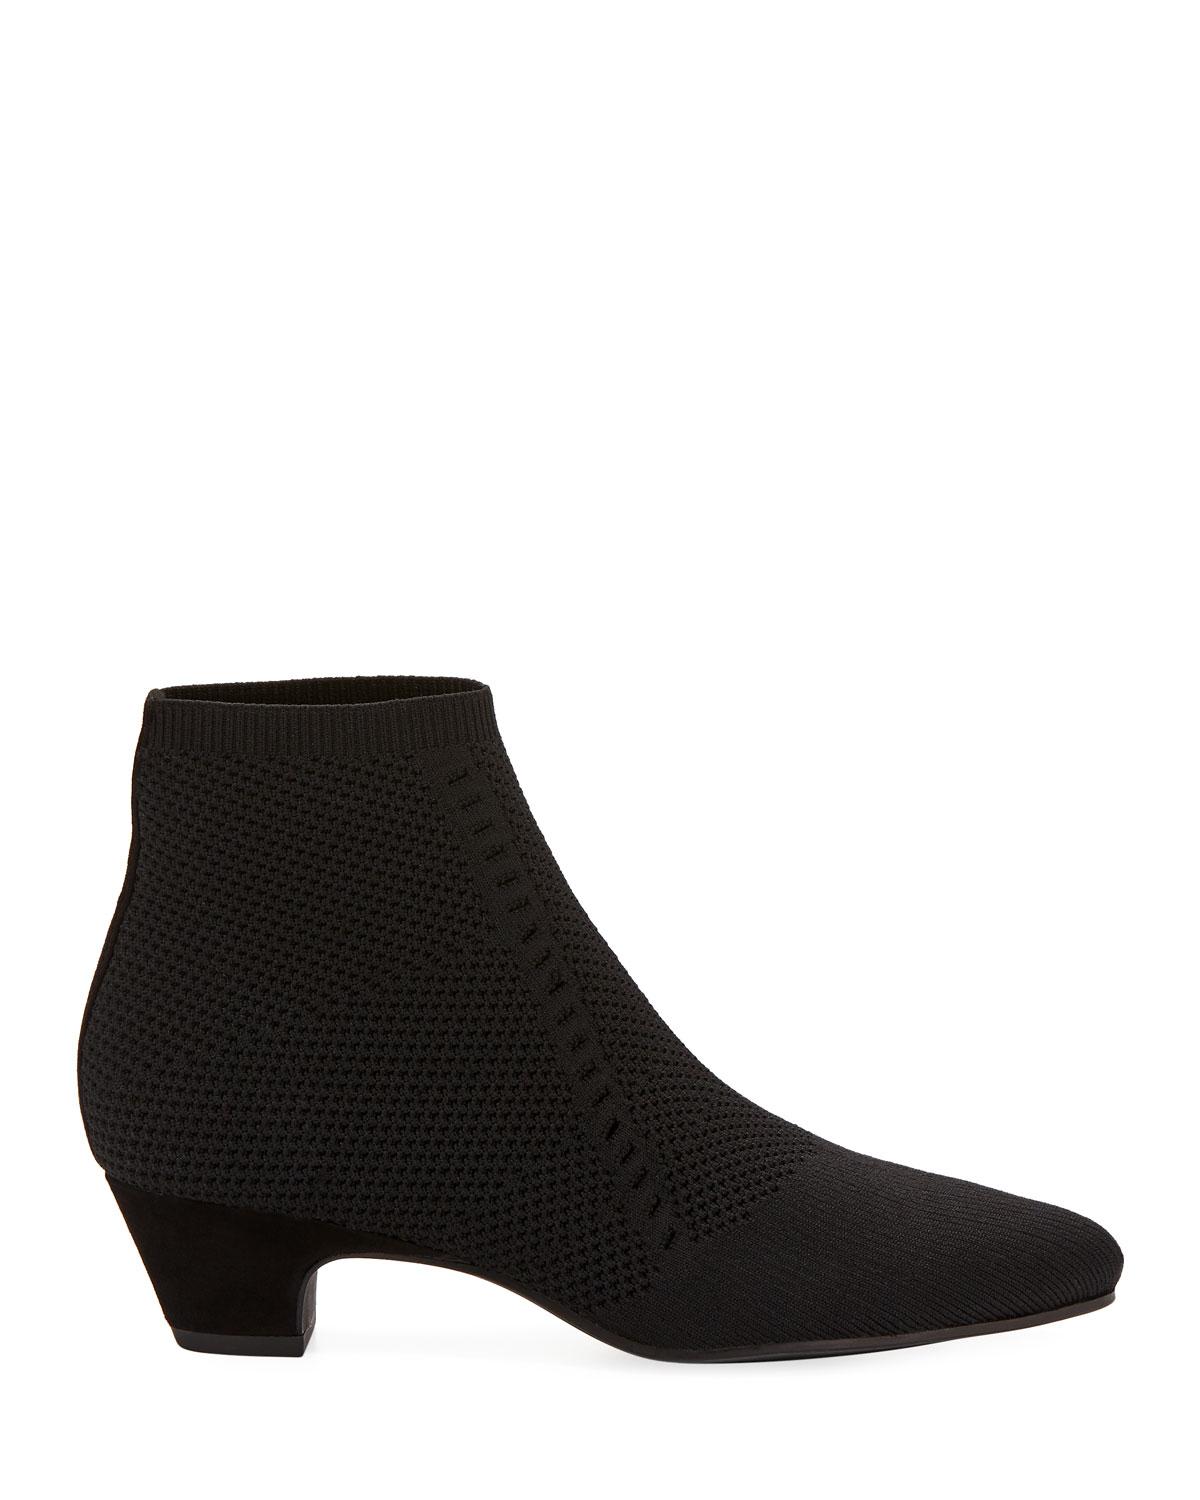 Eileen Fisher Suede Purl Stretch-knit Fabric Booties in Black - Lyst